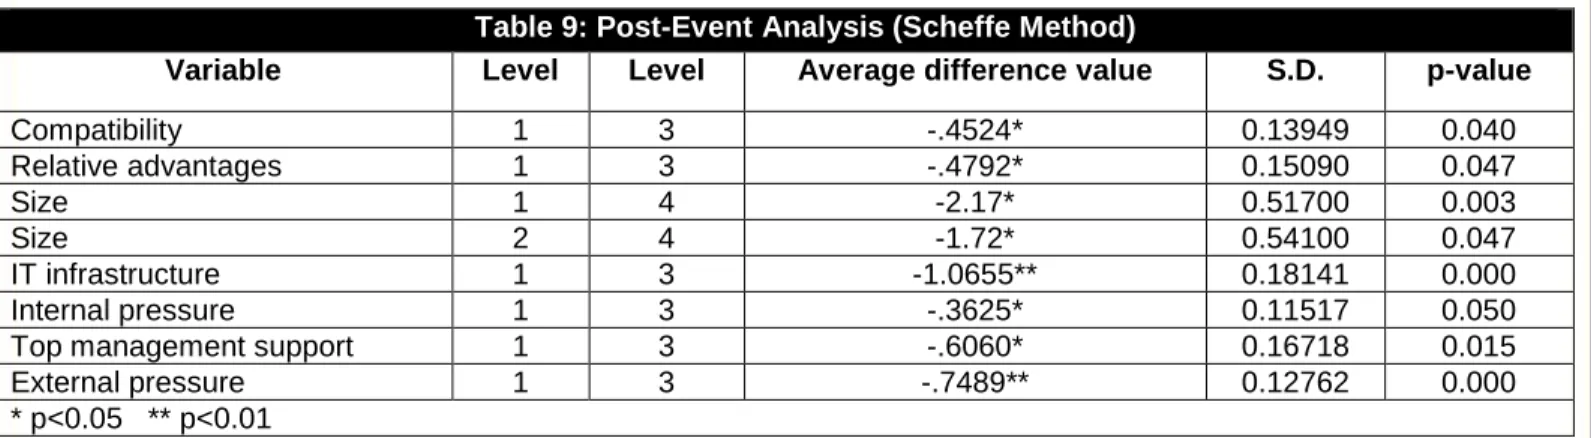 Table 9 illustrates the post-event pairwise comparison, which we conducted by using the univariate Scheffe method